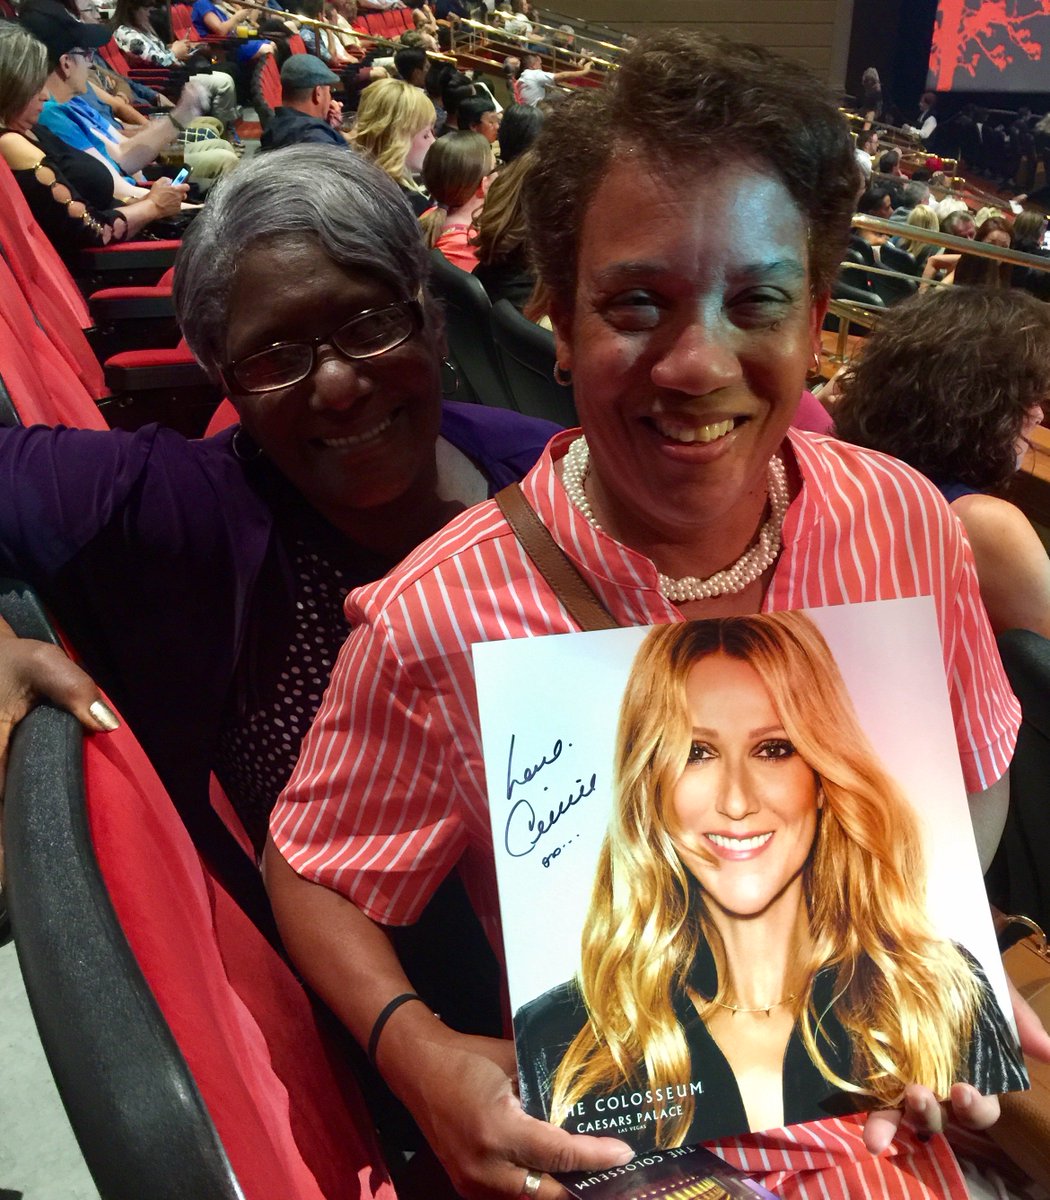 Congratulations to Maxine! Have a wonderful show tonight ;-) - TC #celinedionvegas https://t.co/kgvRQPAcWY